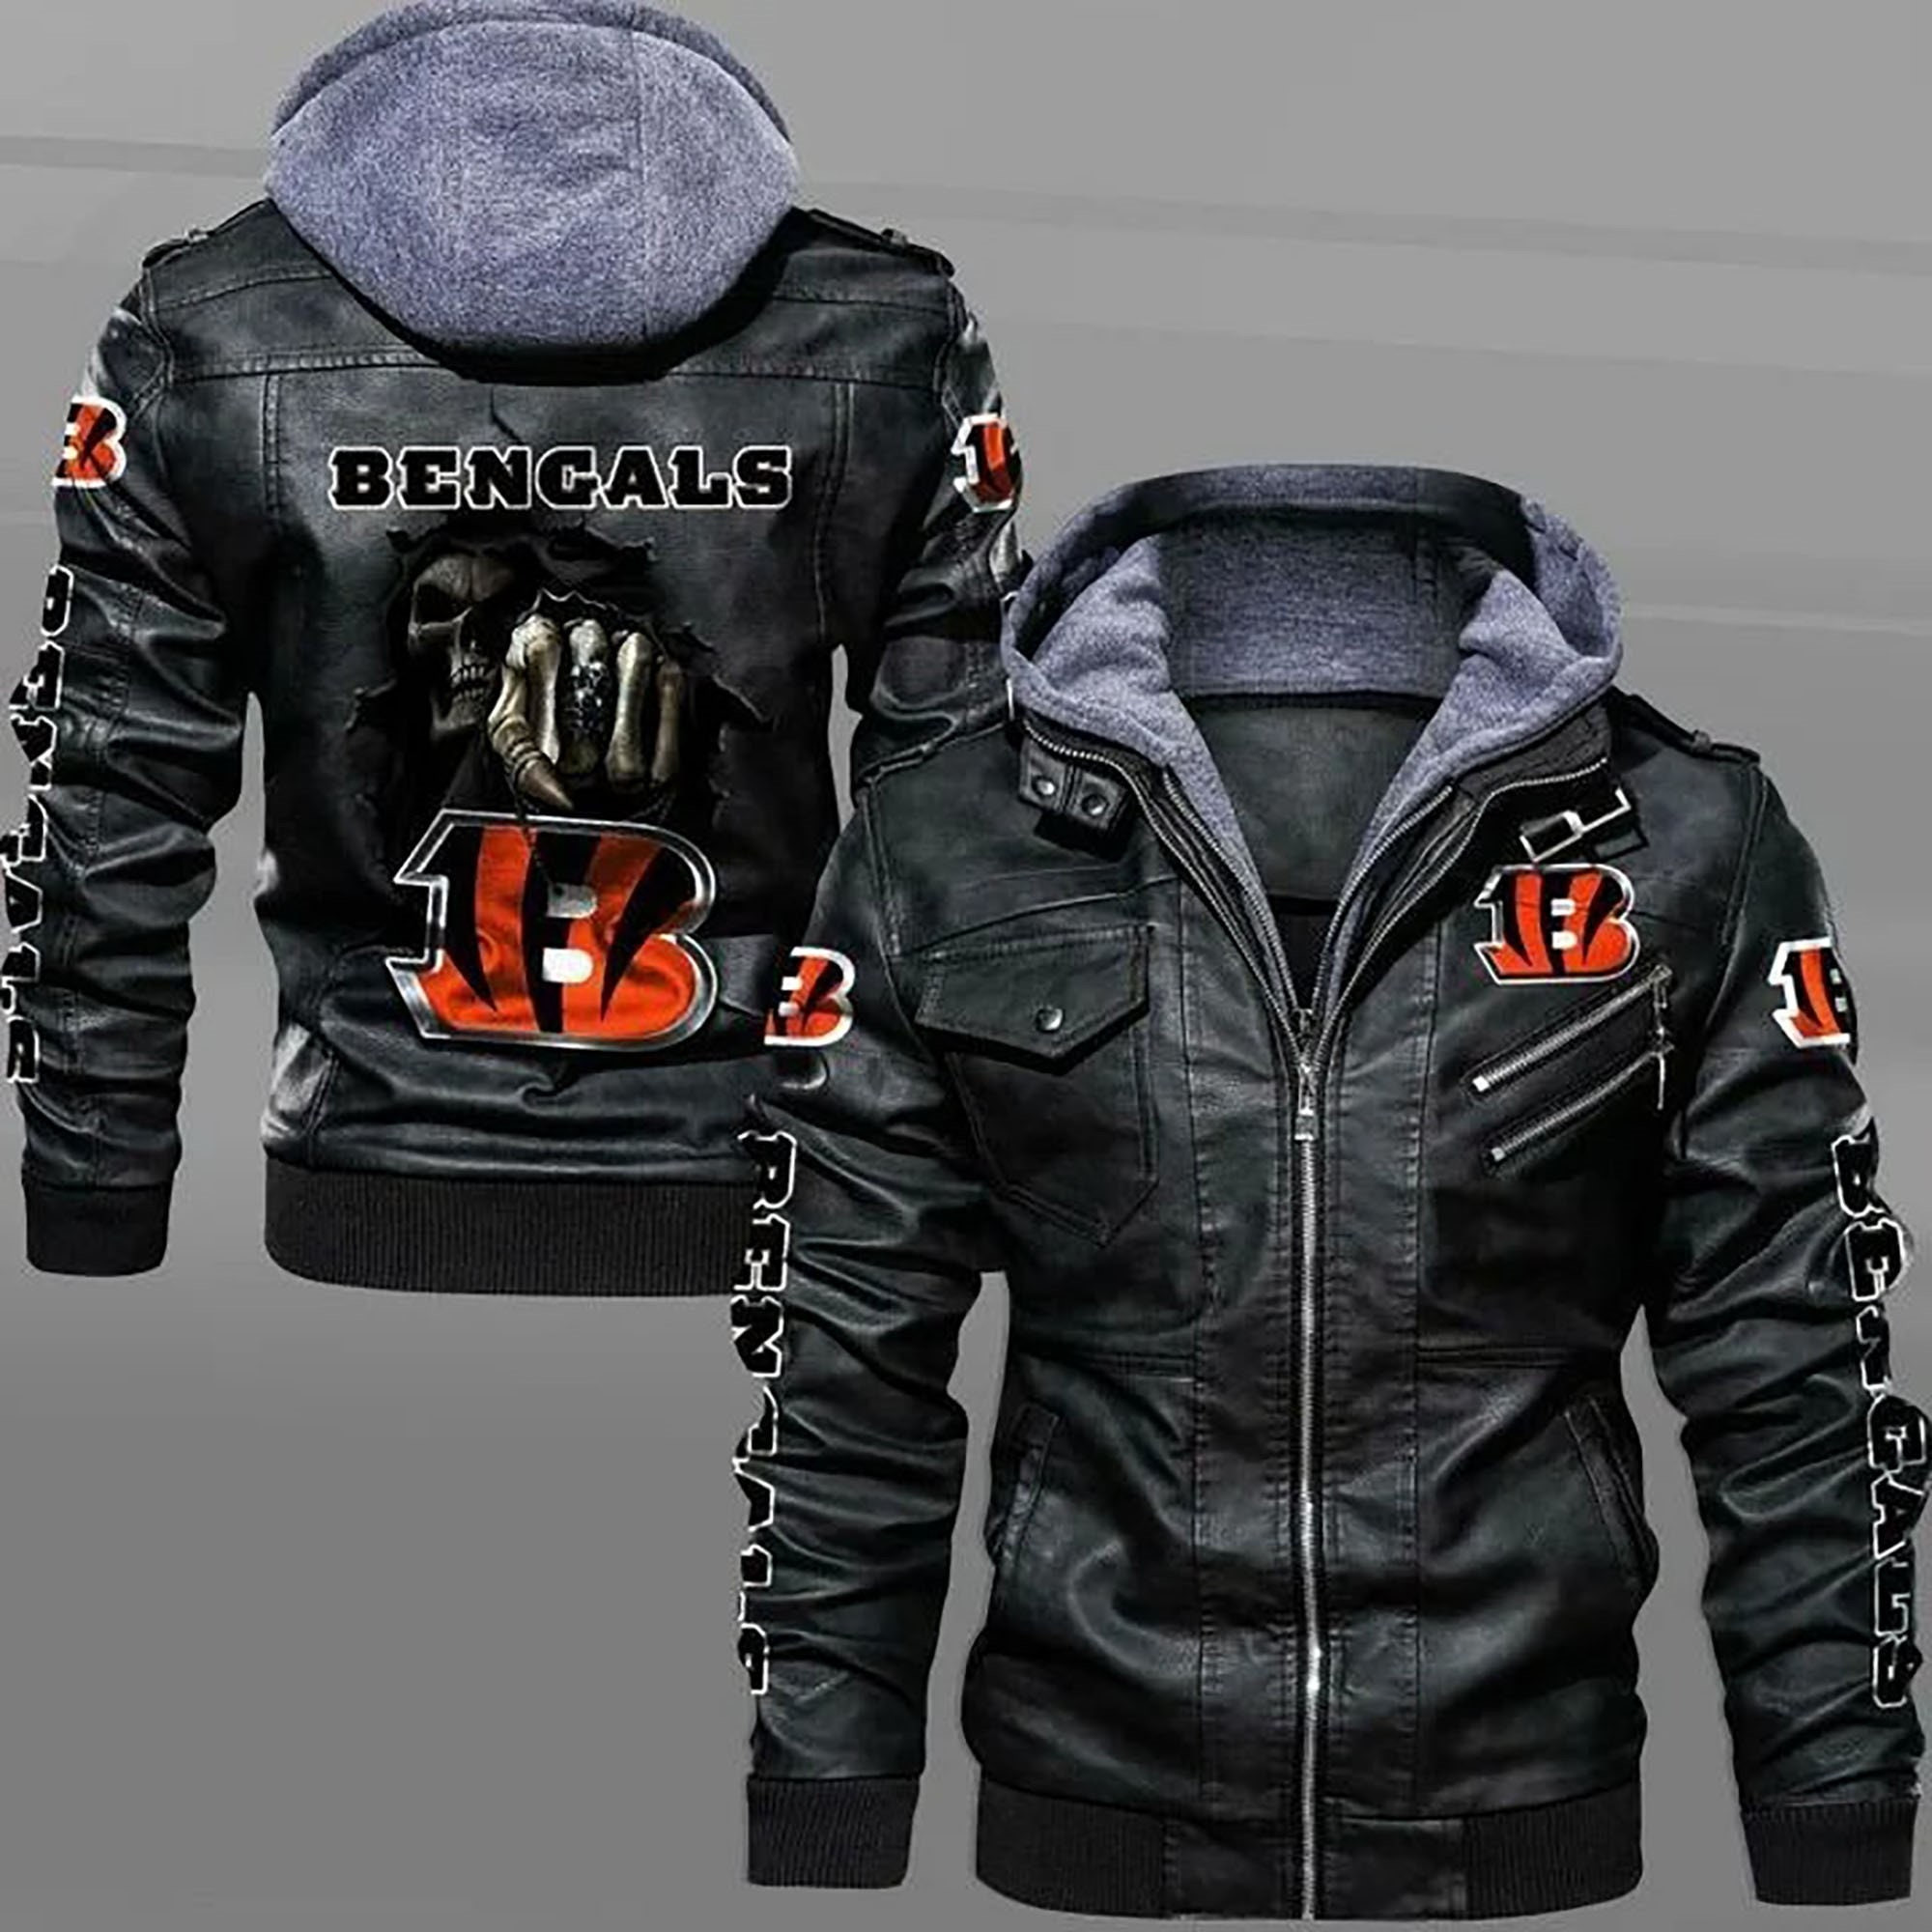 These Amazing Leather Jacket will add to the appeal of your outfit 171